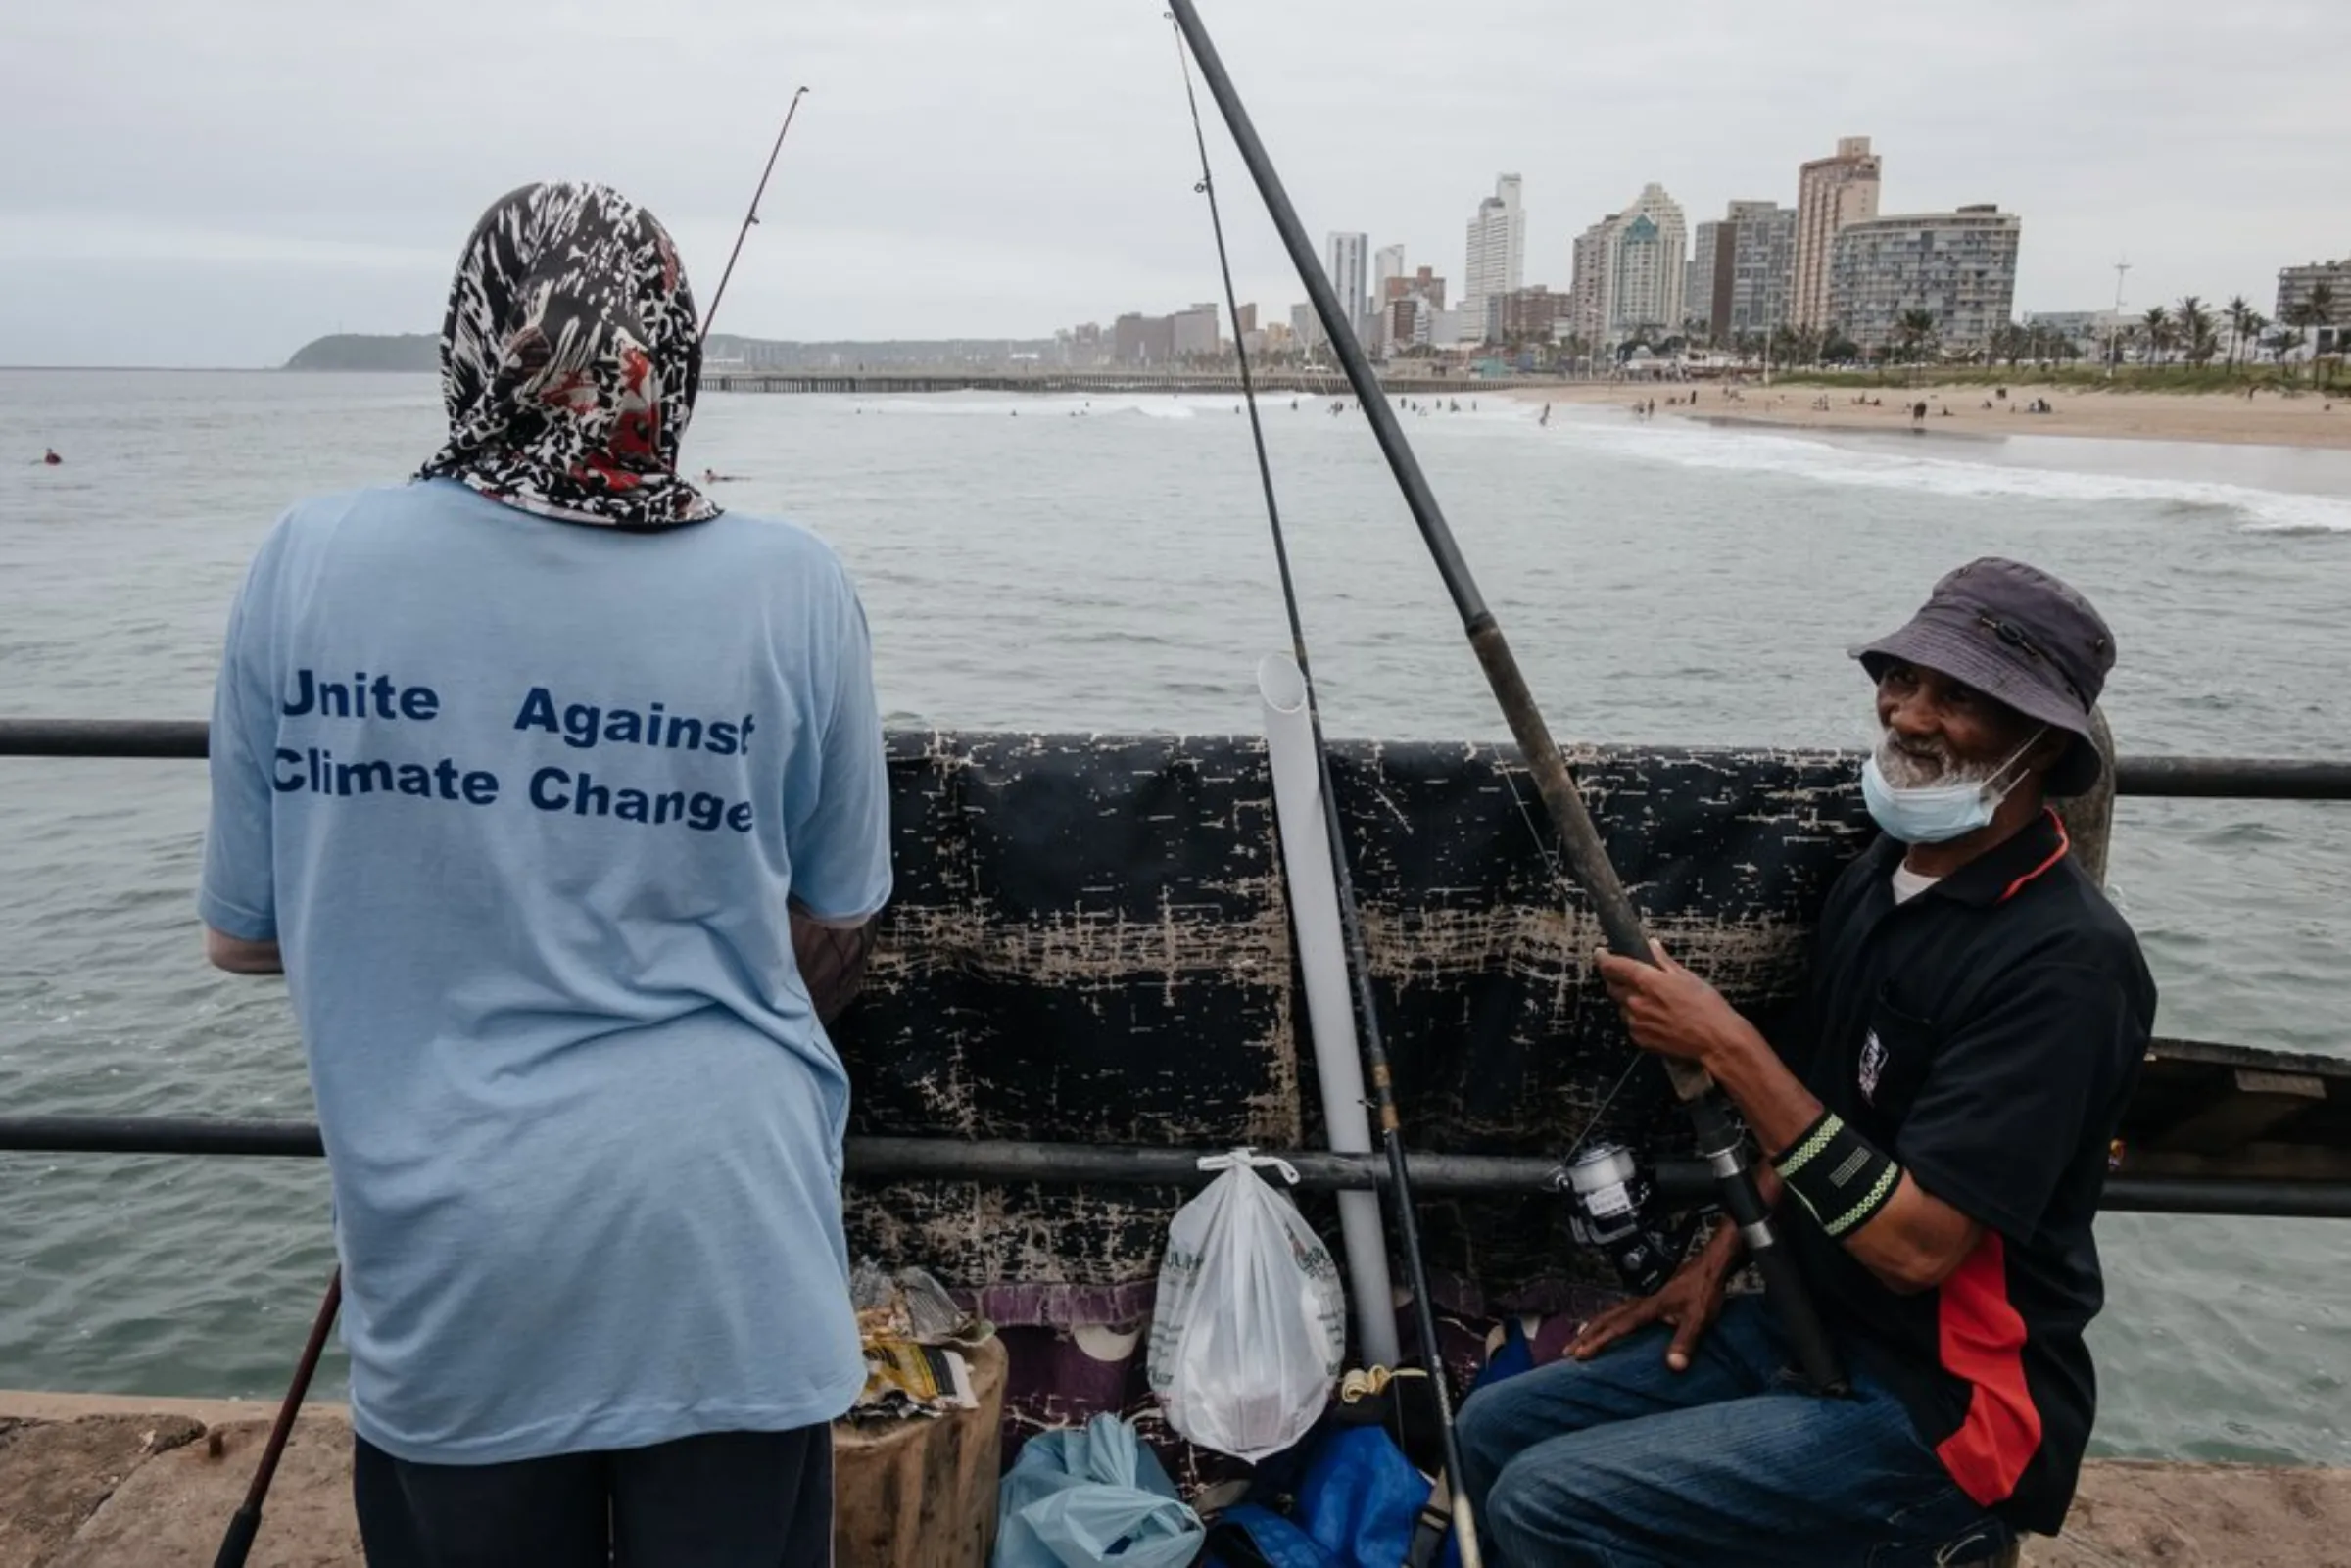 Subsistence anglers cast lines at Snakepark Pier on the beachfront in Durban, South Africa, April 1, 2021